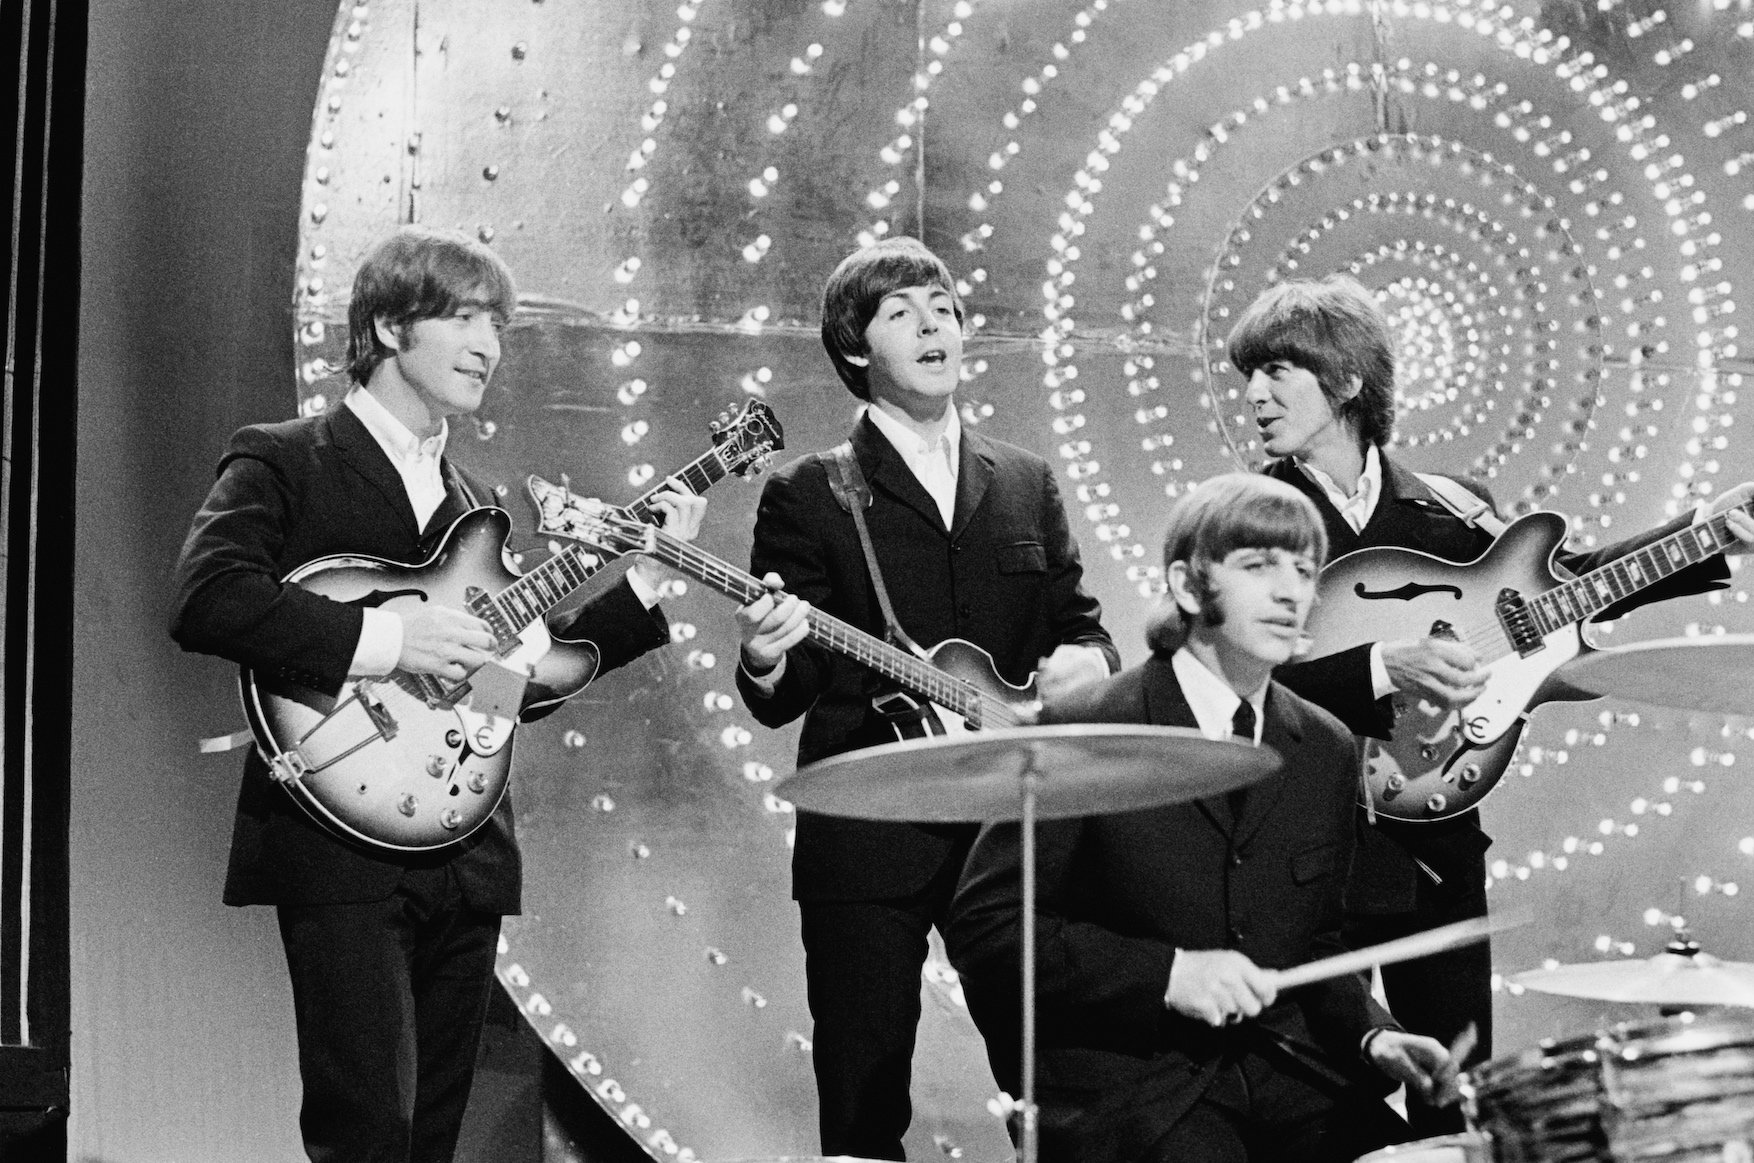 The Beatles perform on the BBC TV show 'Top of the Pops' in London